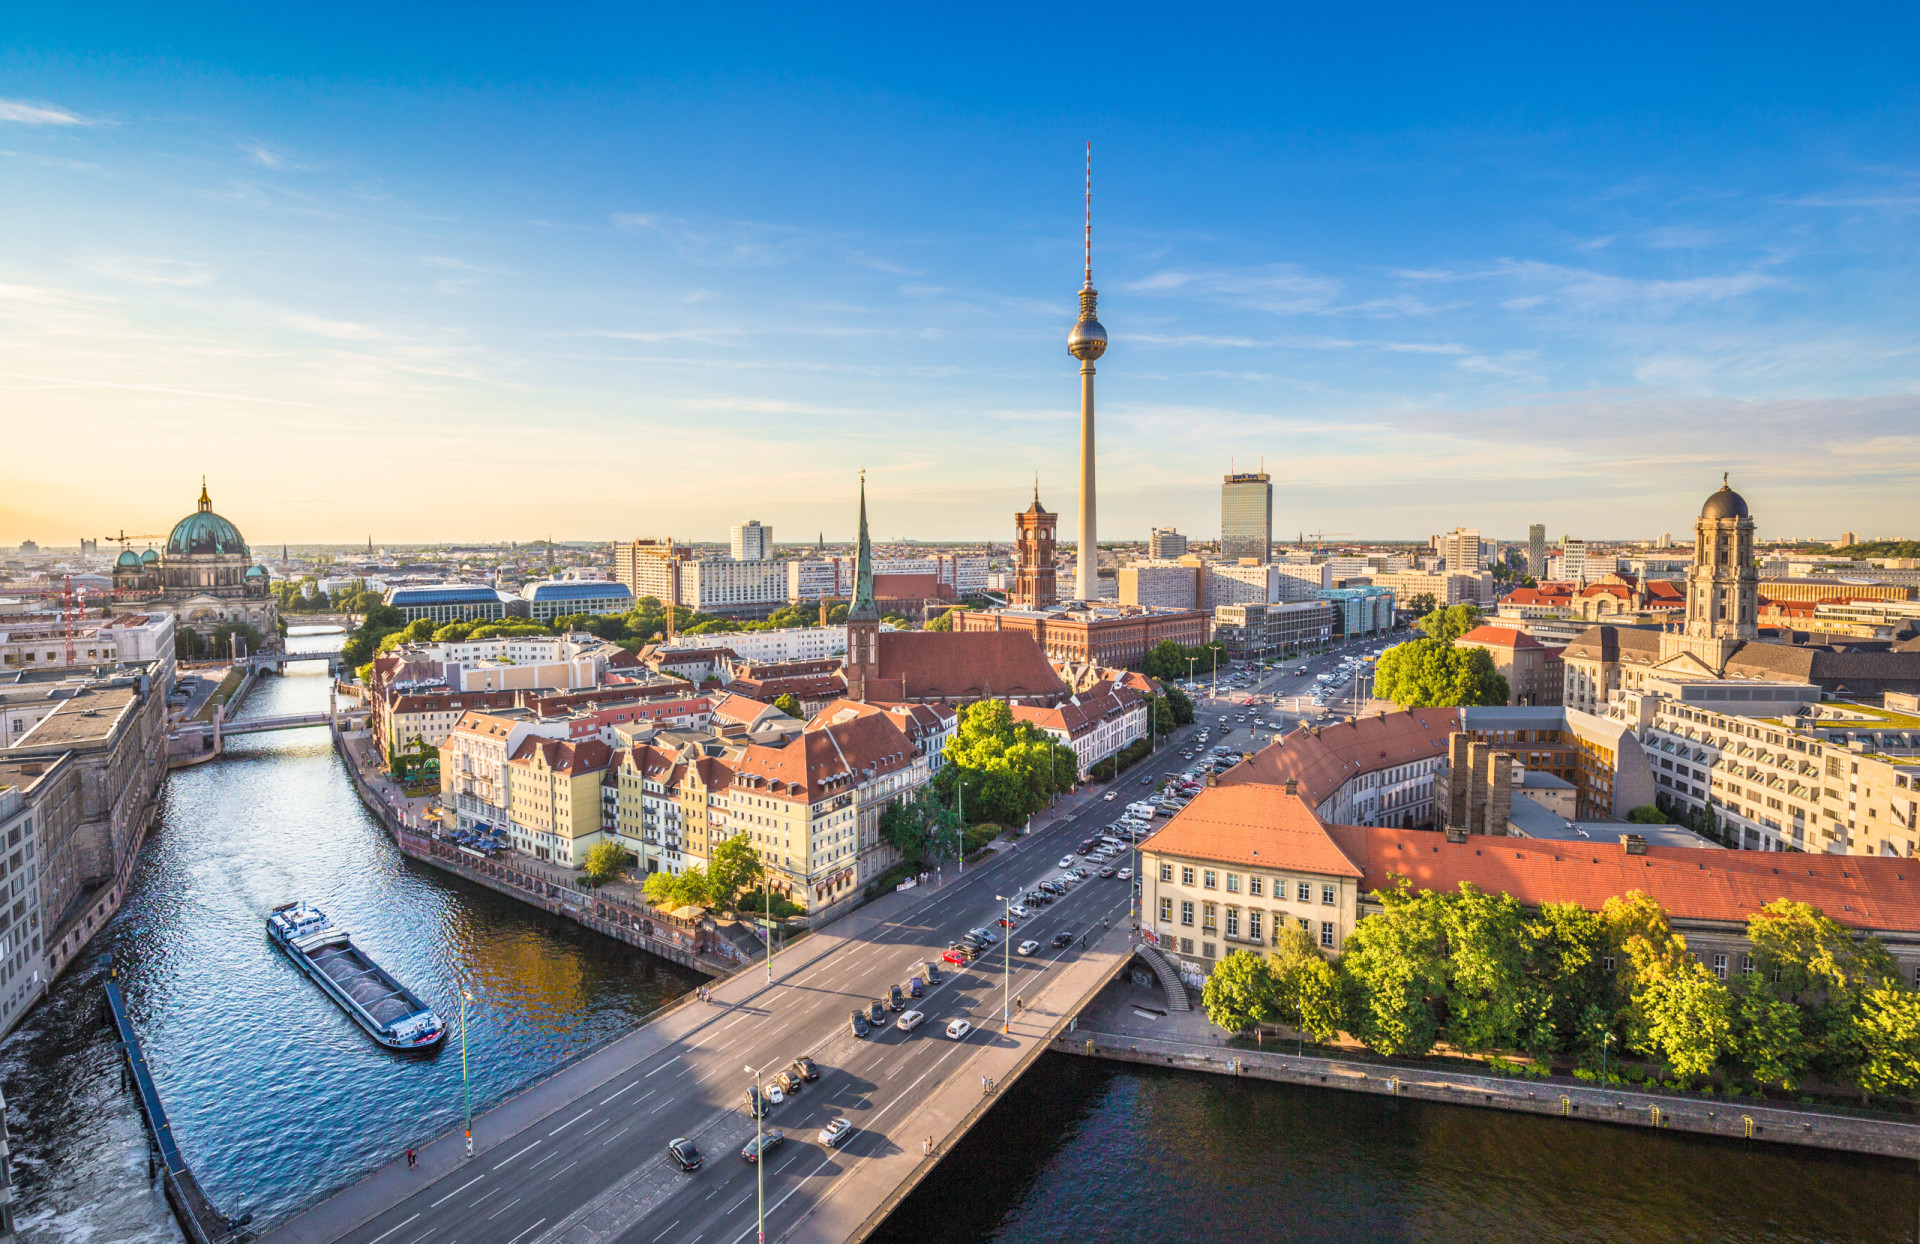 <p>Germany has a "culture tax," called <em>kulturförderabgabe</em>, and a "bed tax," <em>bettensteuer</em>, in cities including Frankfurt, Hamburg, and Berlin. It tends to be around 5% of your hotel bill.</p><p>You may also like:<a href="https://www.starsinsider.com/n/241869?utm_source=msn.com&utm_medium=display&utm_campaign=referral_description&utm_content=683460en-ph"> Early 2000s: fashion choices celebs wish they could forget</a></p>